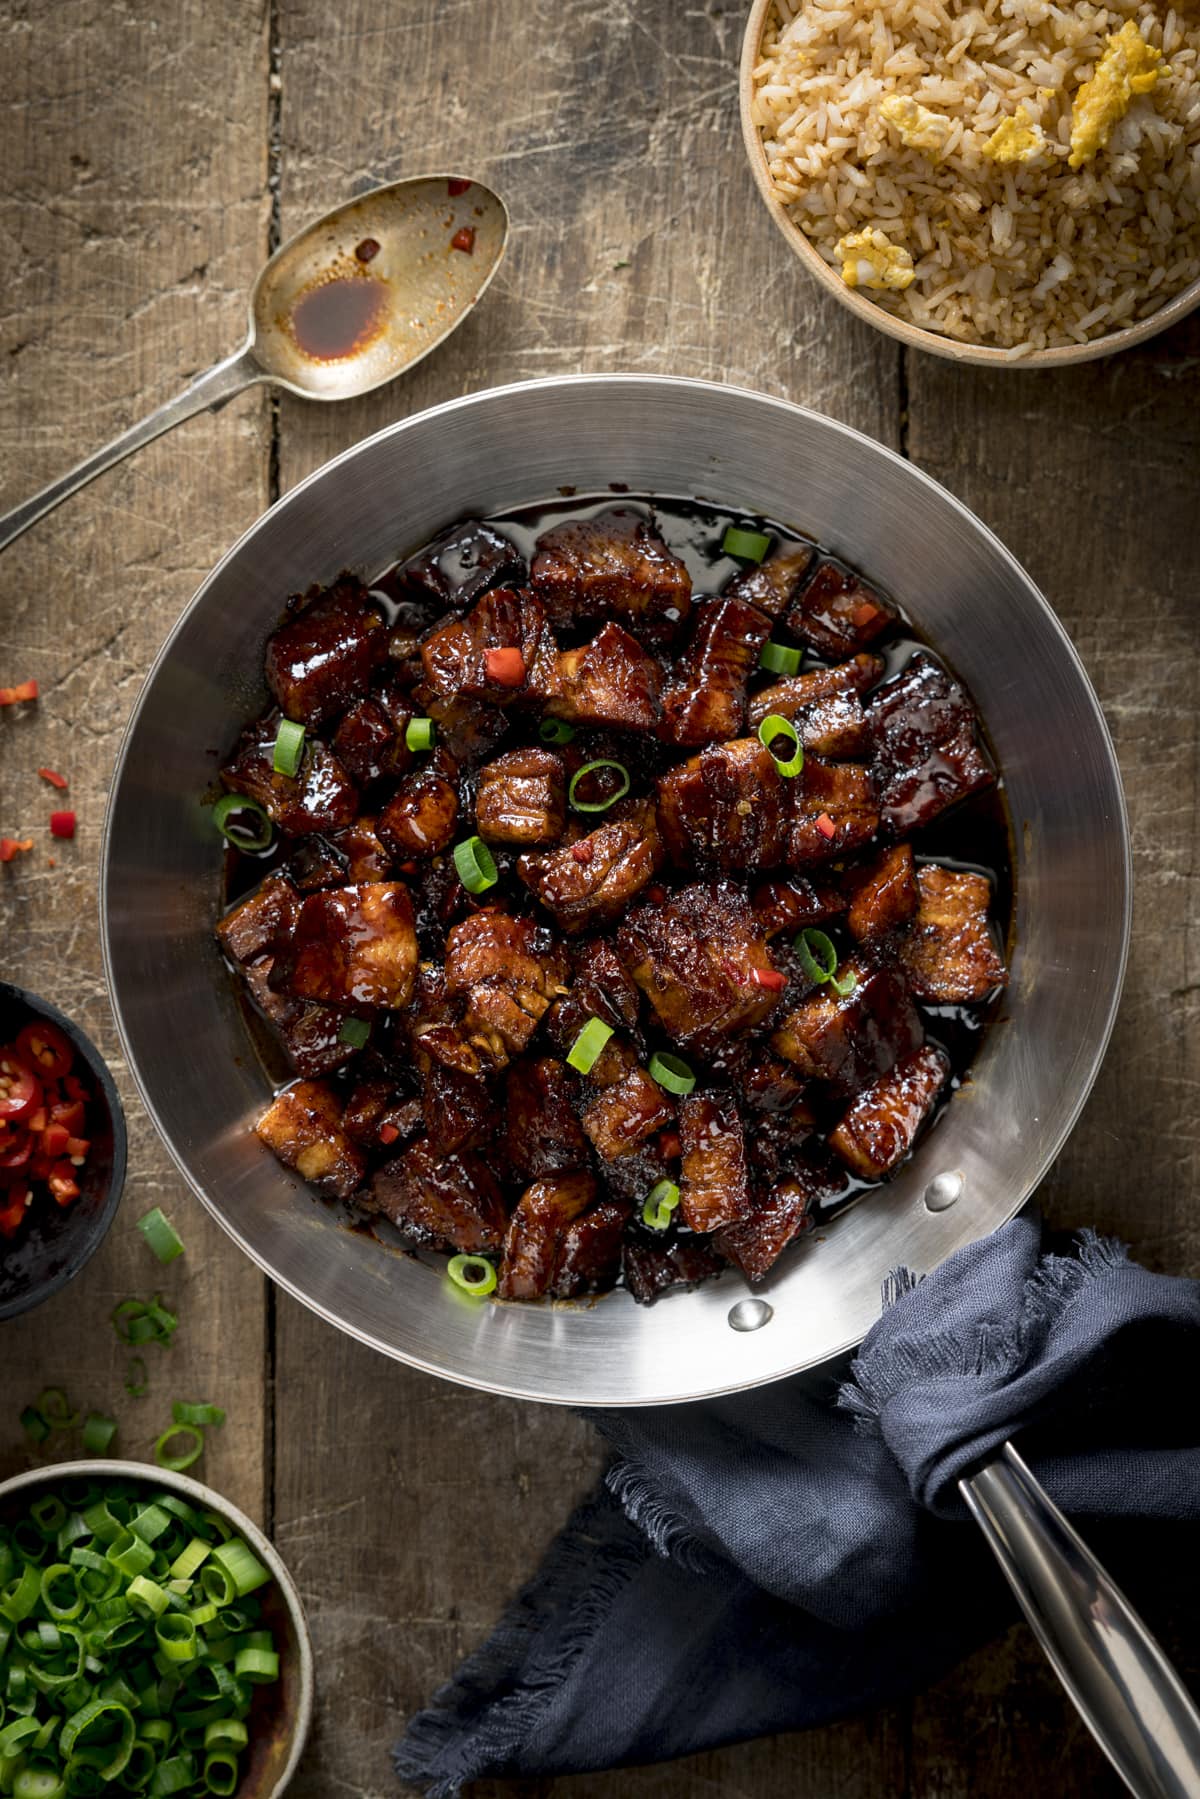 Overhead image of sticky Chinese pork belly in a silver frying pan. The pan is on a wooden table and there are spring onions, chillies and fried rice in bowls around the pan.